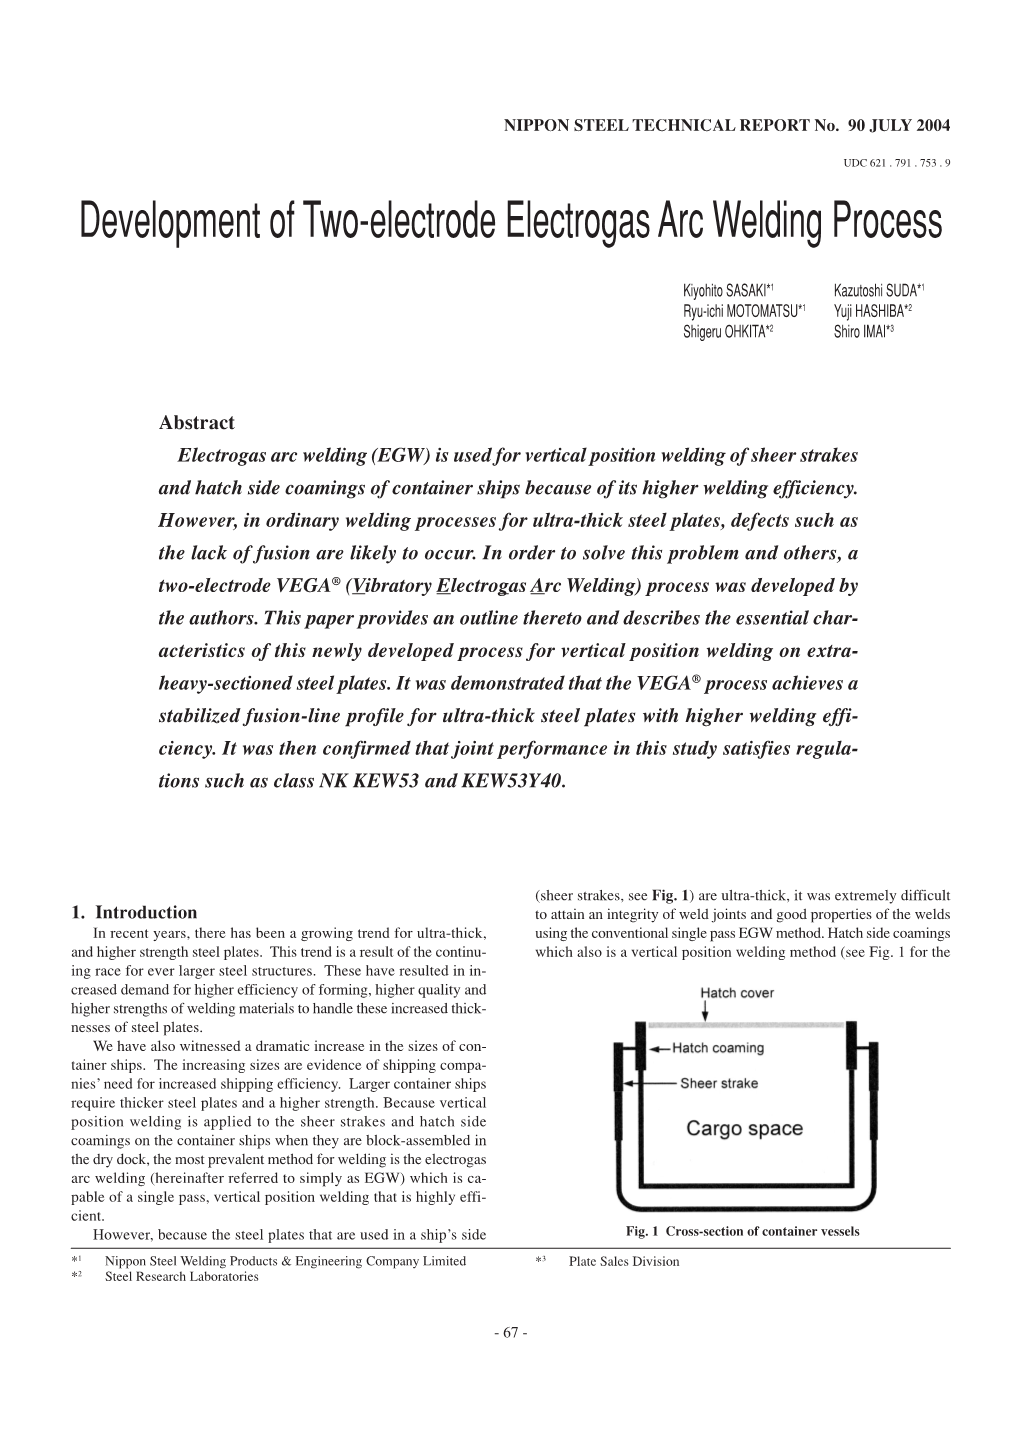 Development of Two-Electrode Electrogas Arc Welding Process